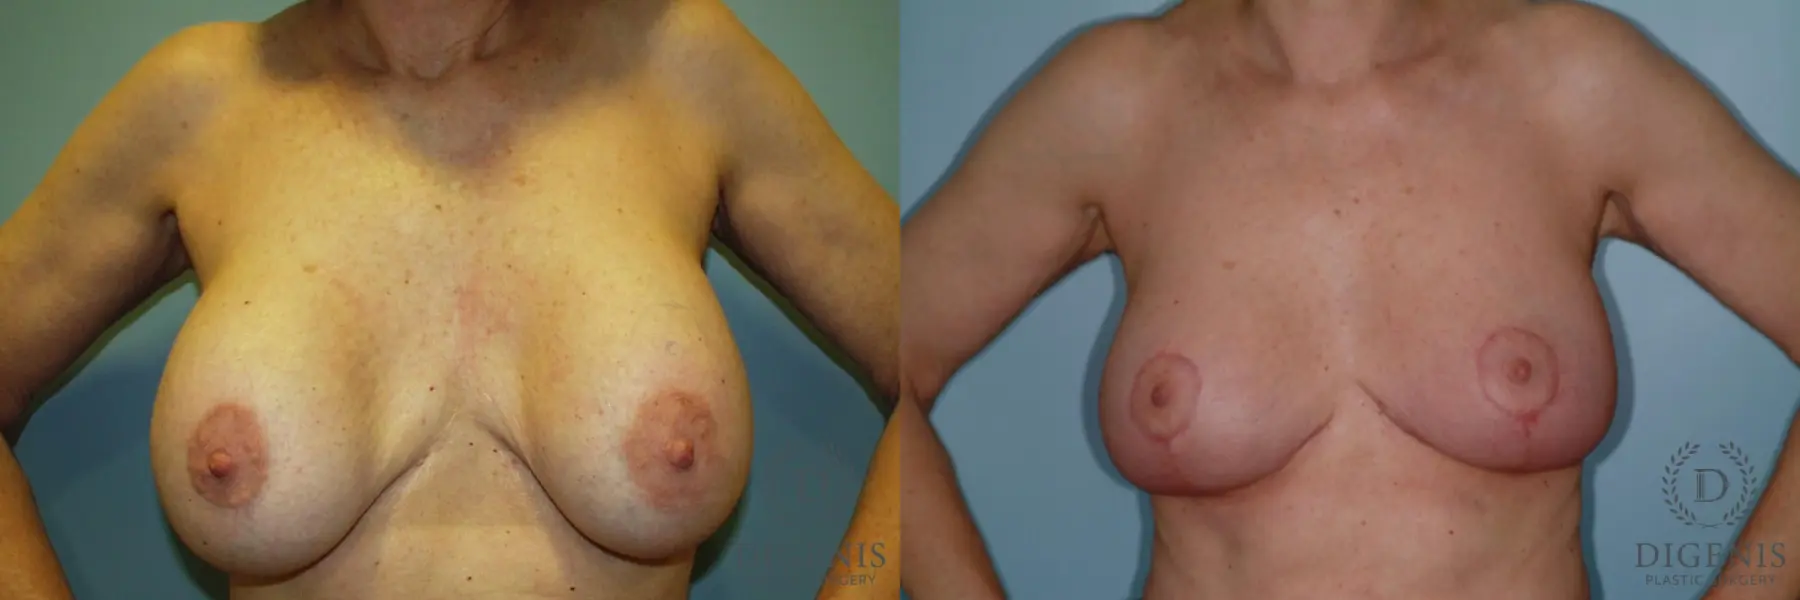 Breast Lift With Implants: Patient 6 - Before and After  